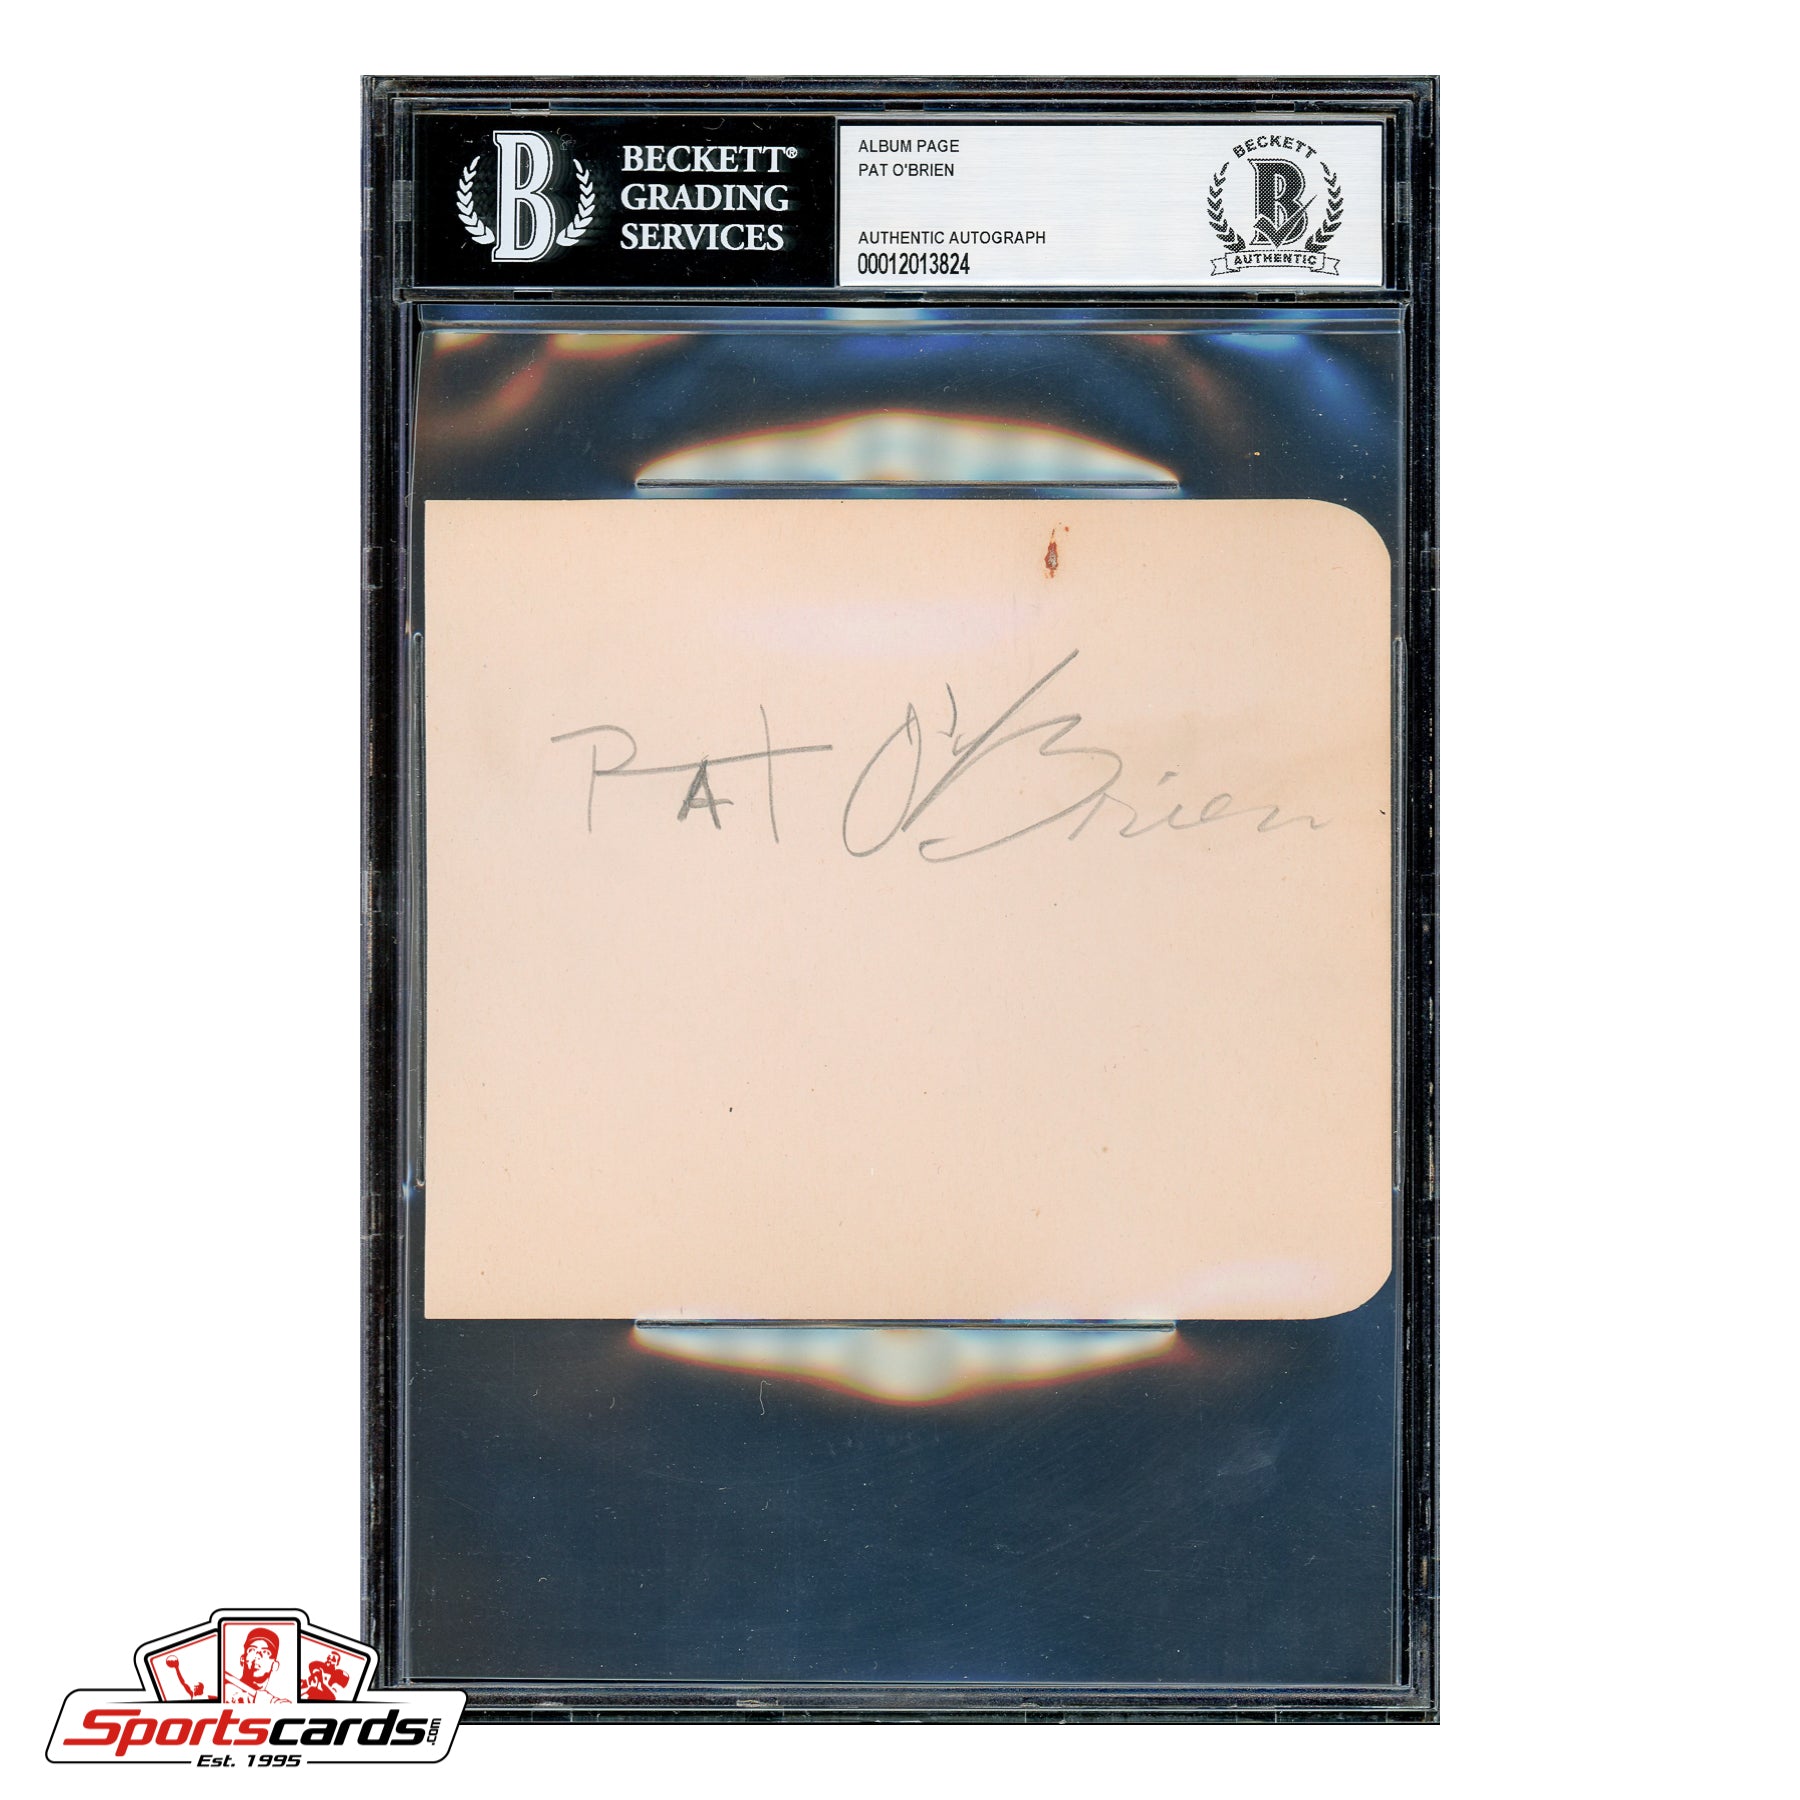 Pat O'Brien Signed Auto Album Page Beckett BAS Authentic - Played Knute Rockne